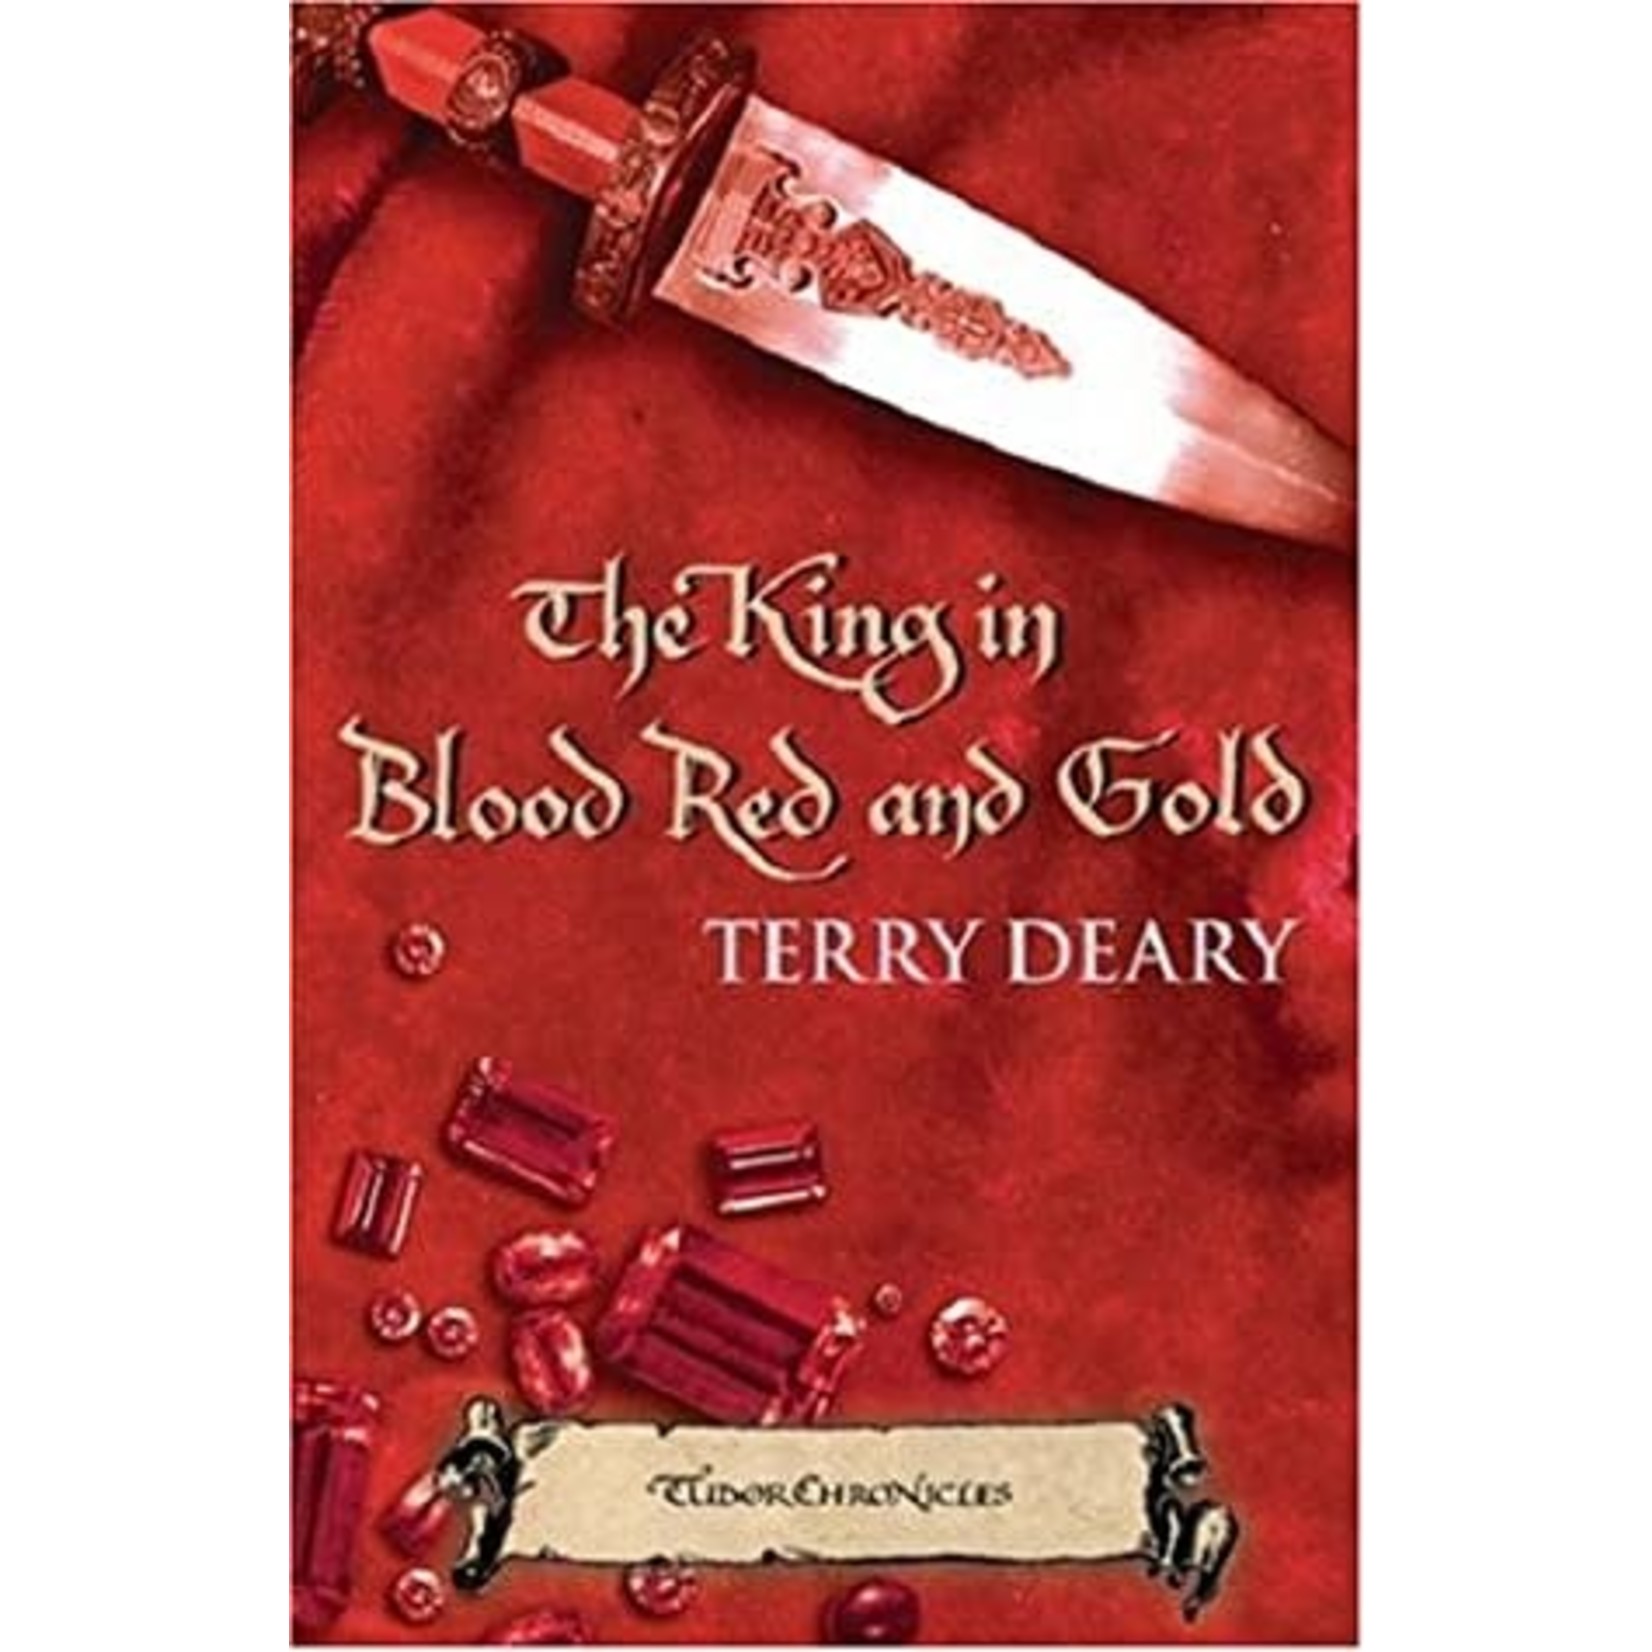 Terry Deary Tudor Chronicles The King in Blood Red and Gold